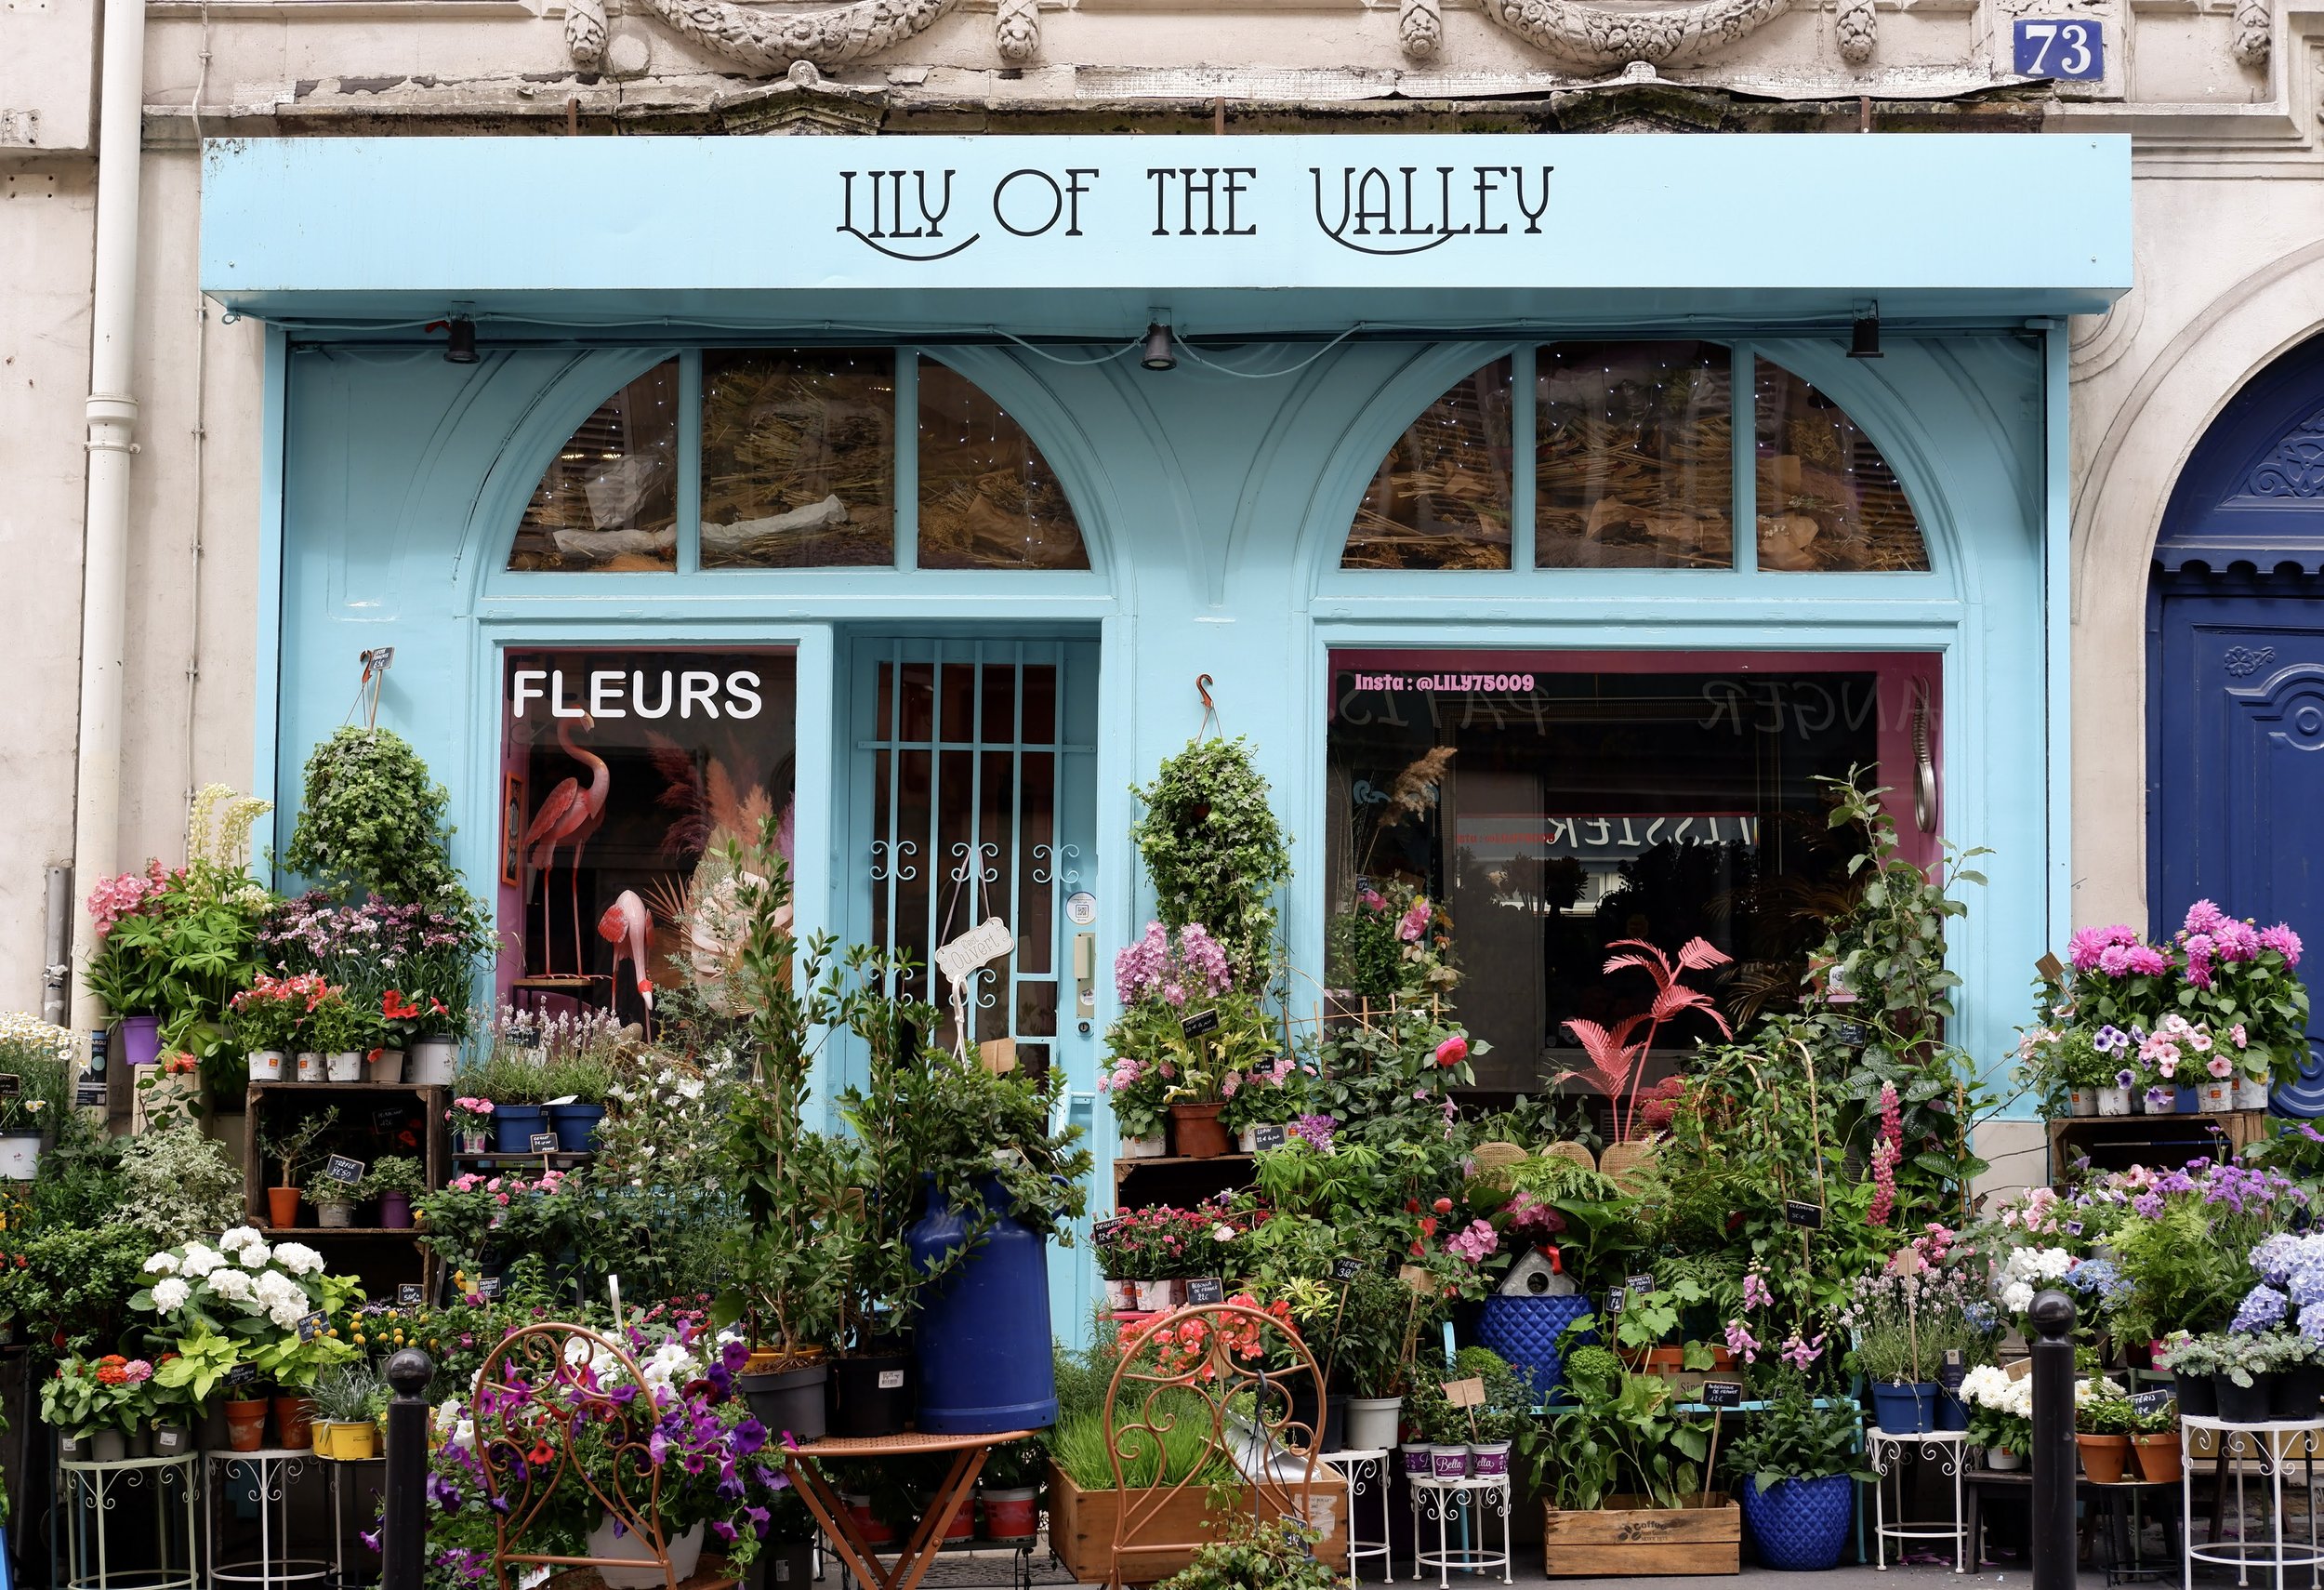  lily of the valley flower shop in paris france   